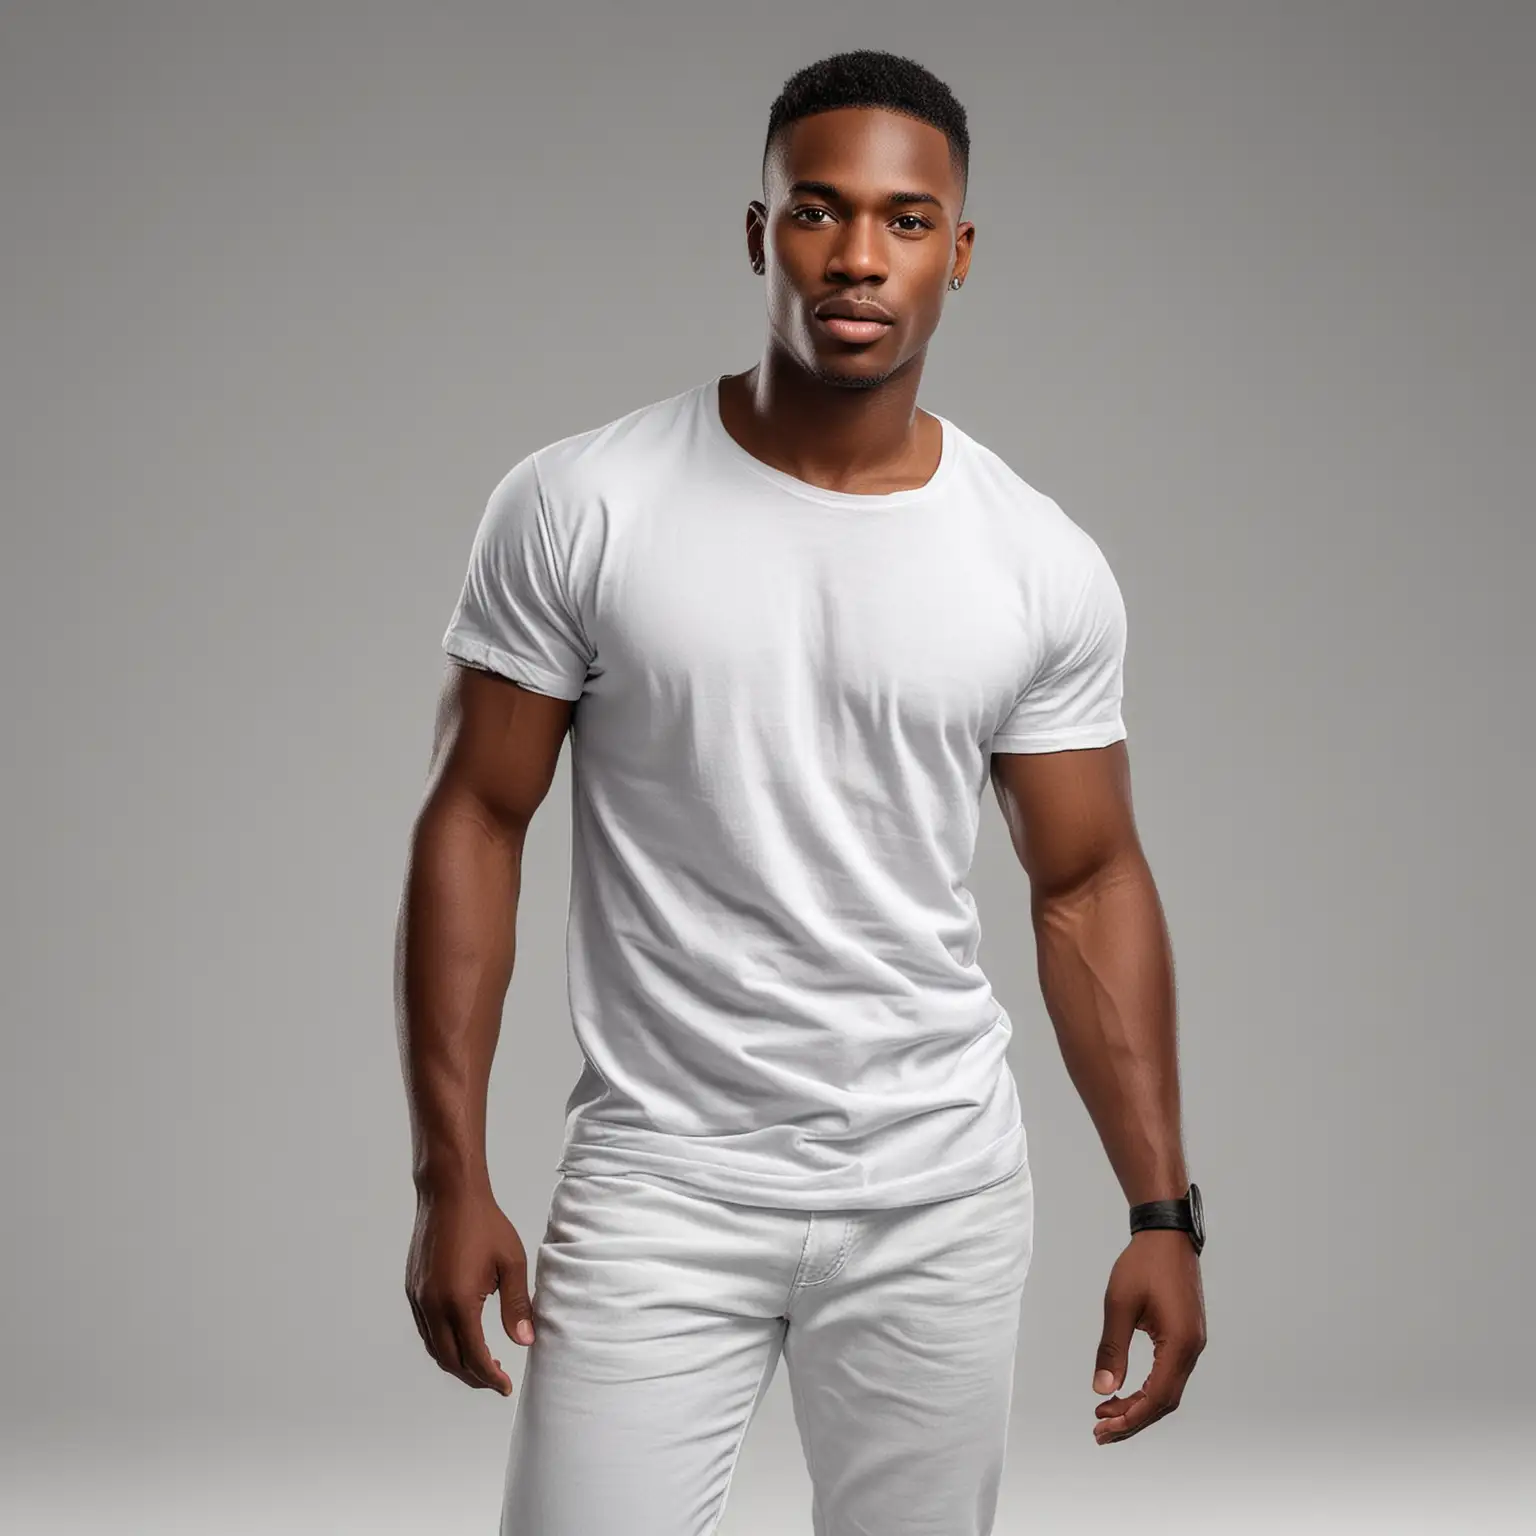 Handsome Bahamian Male Model in White Pants and Designer TShirt in Studio Setting